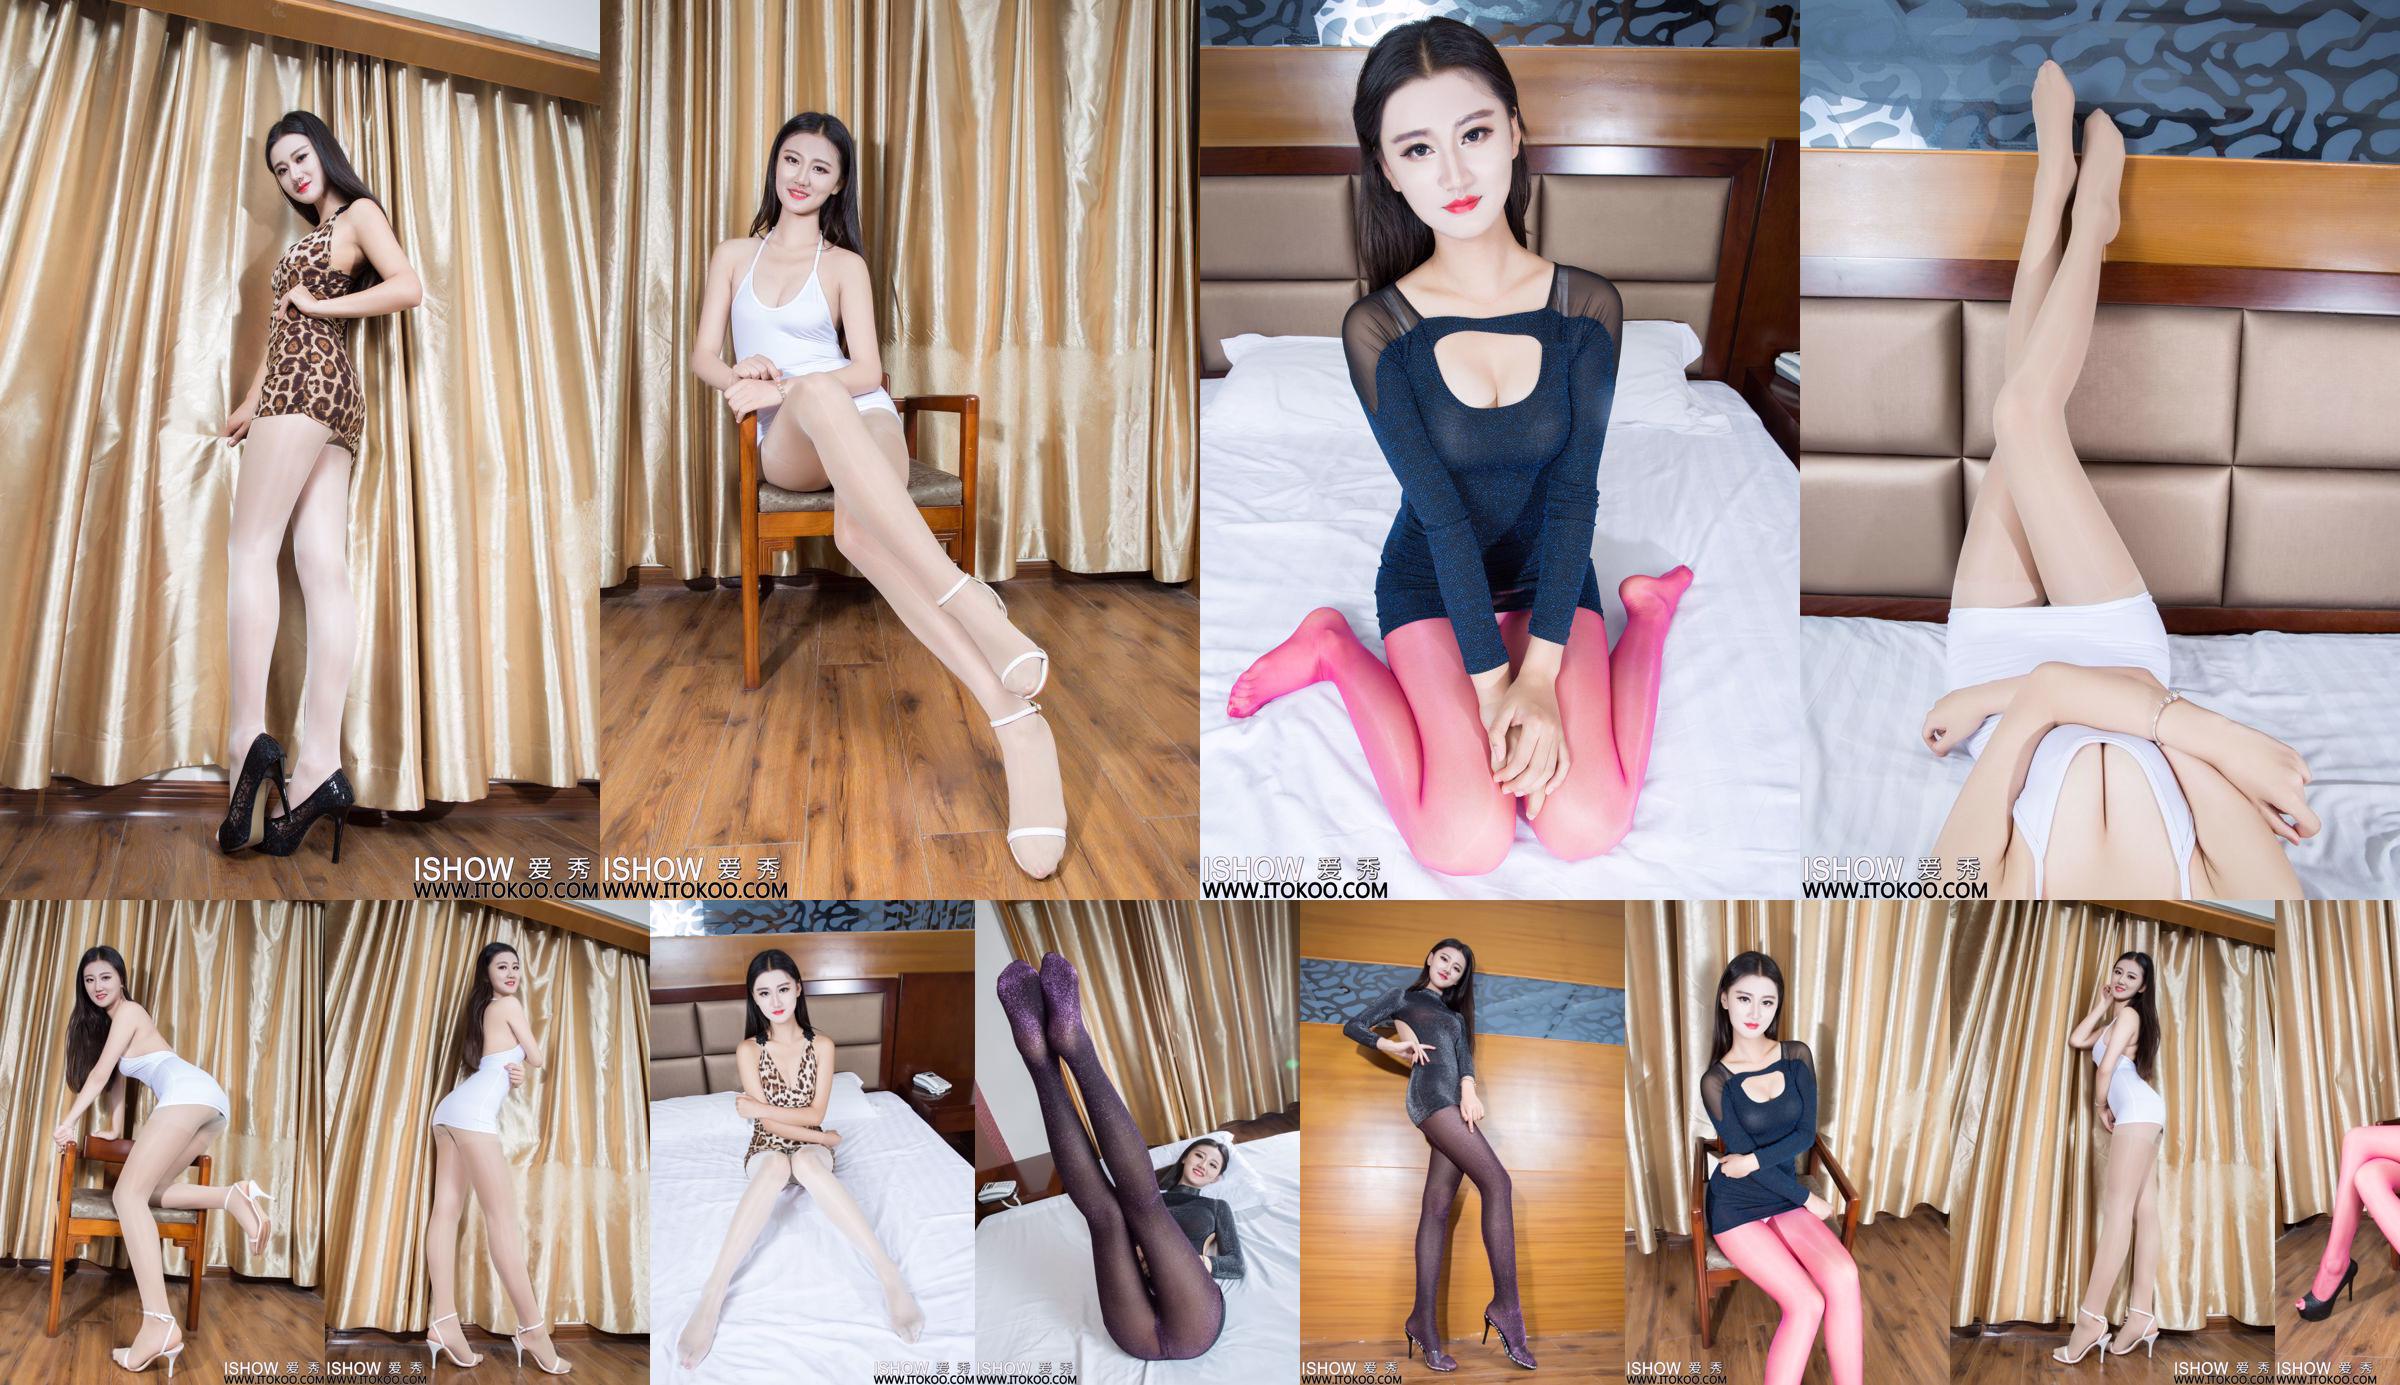 Nina "Super beautiful face value with modern sense" [ISHOW Love Show] NO.053 No.d762f7 Page 4